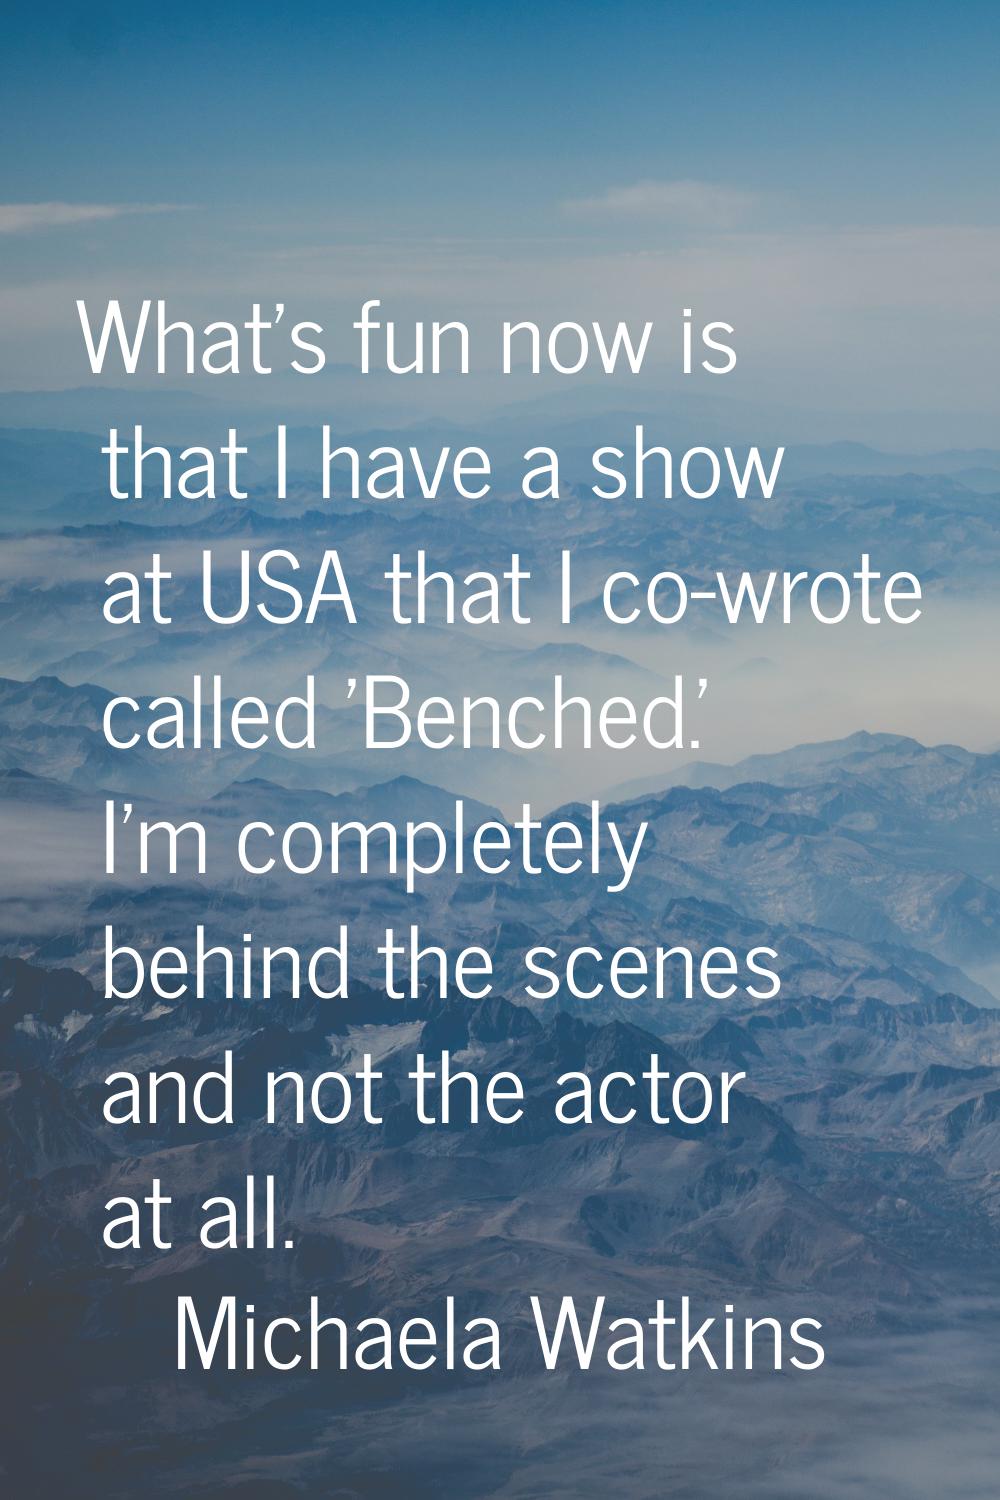 What's fun now is that I have a show at USA that I co-wrote called 'Benched.' I'm completely behind